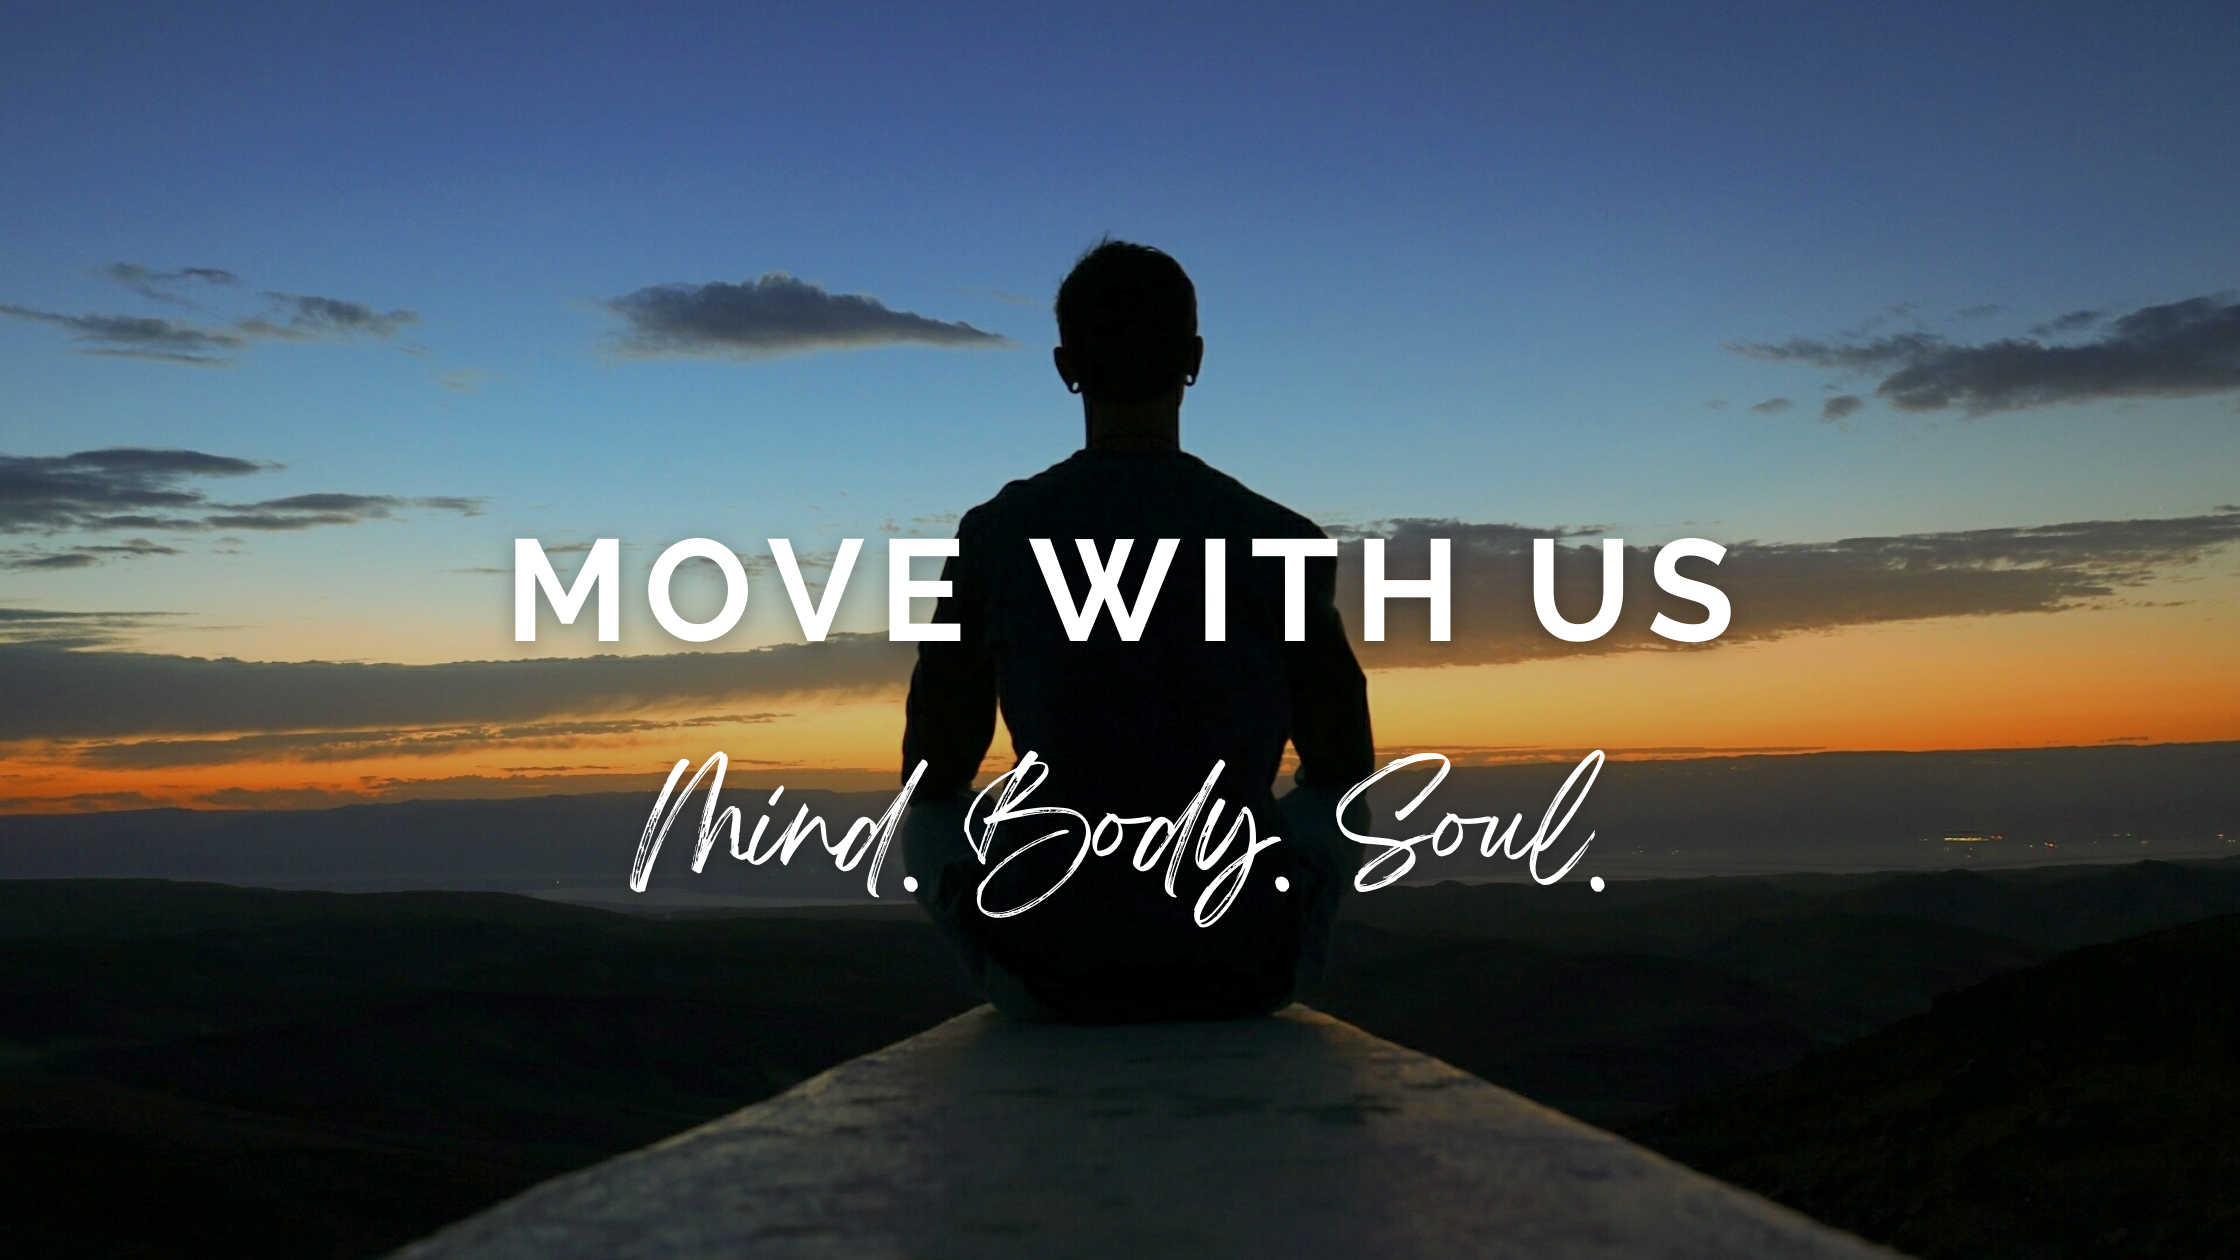 MOVE WITH US